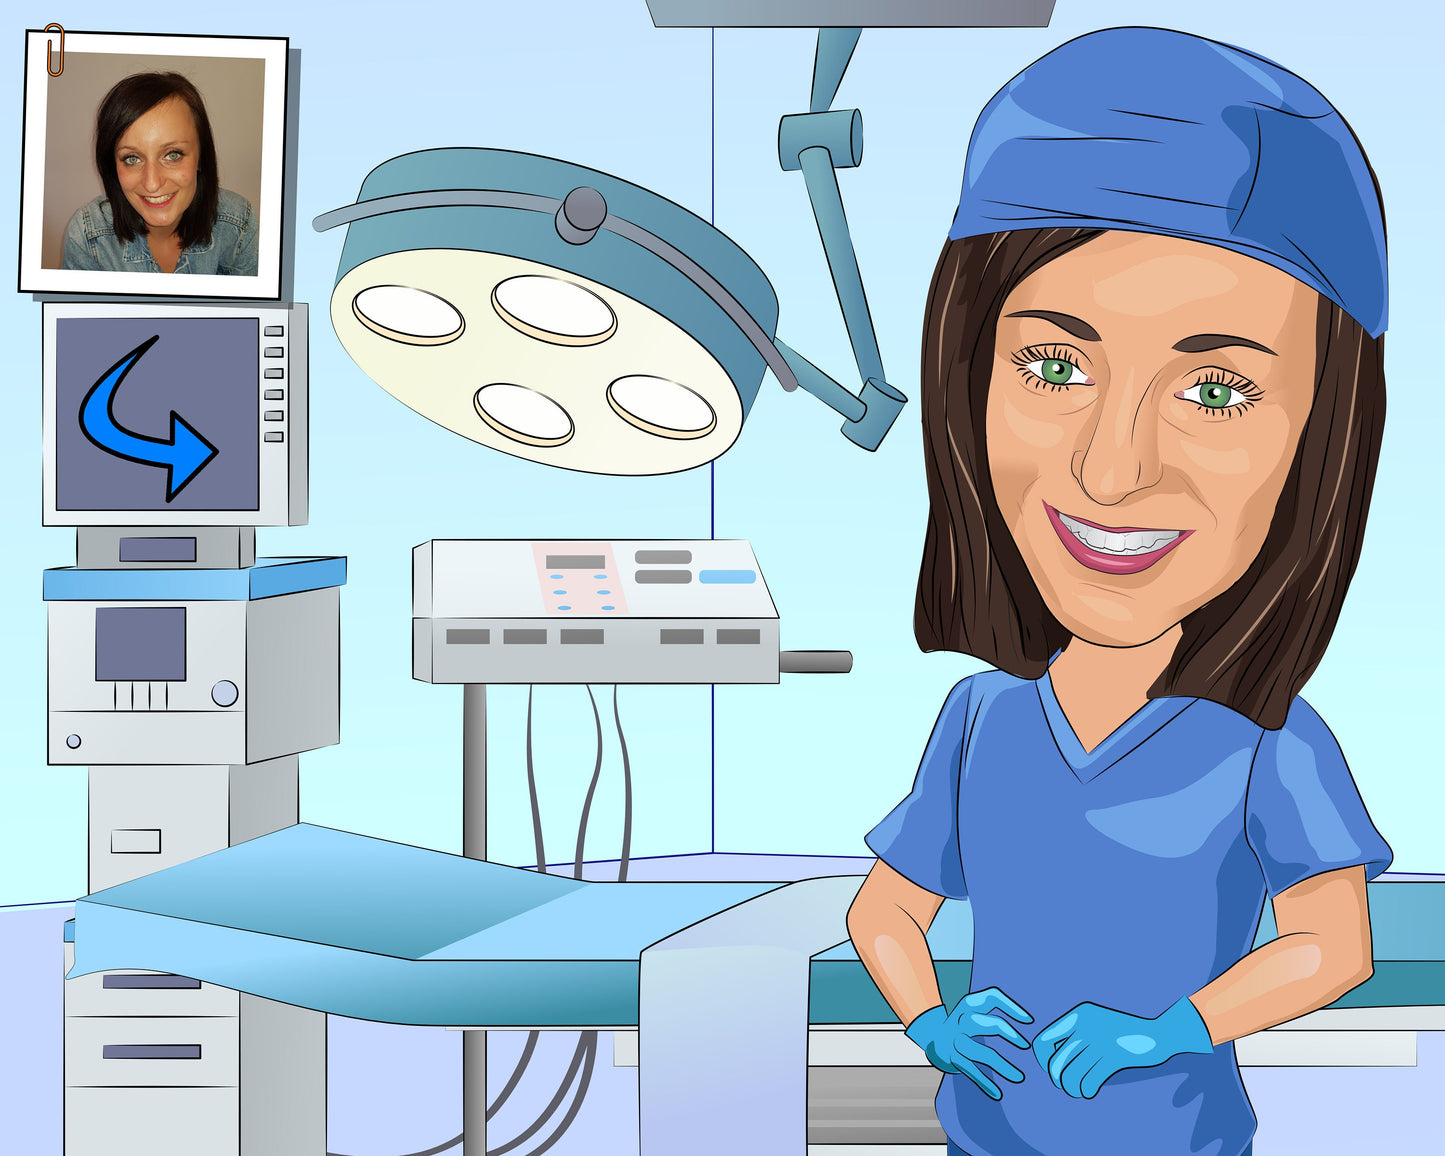 Surgical Tech Gift - Custom Caricature From Your Photo, Surgical Technologist, surgery tech